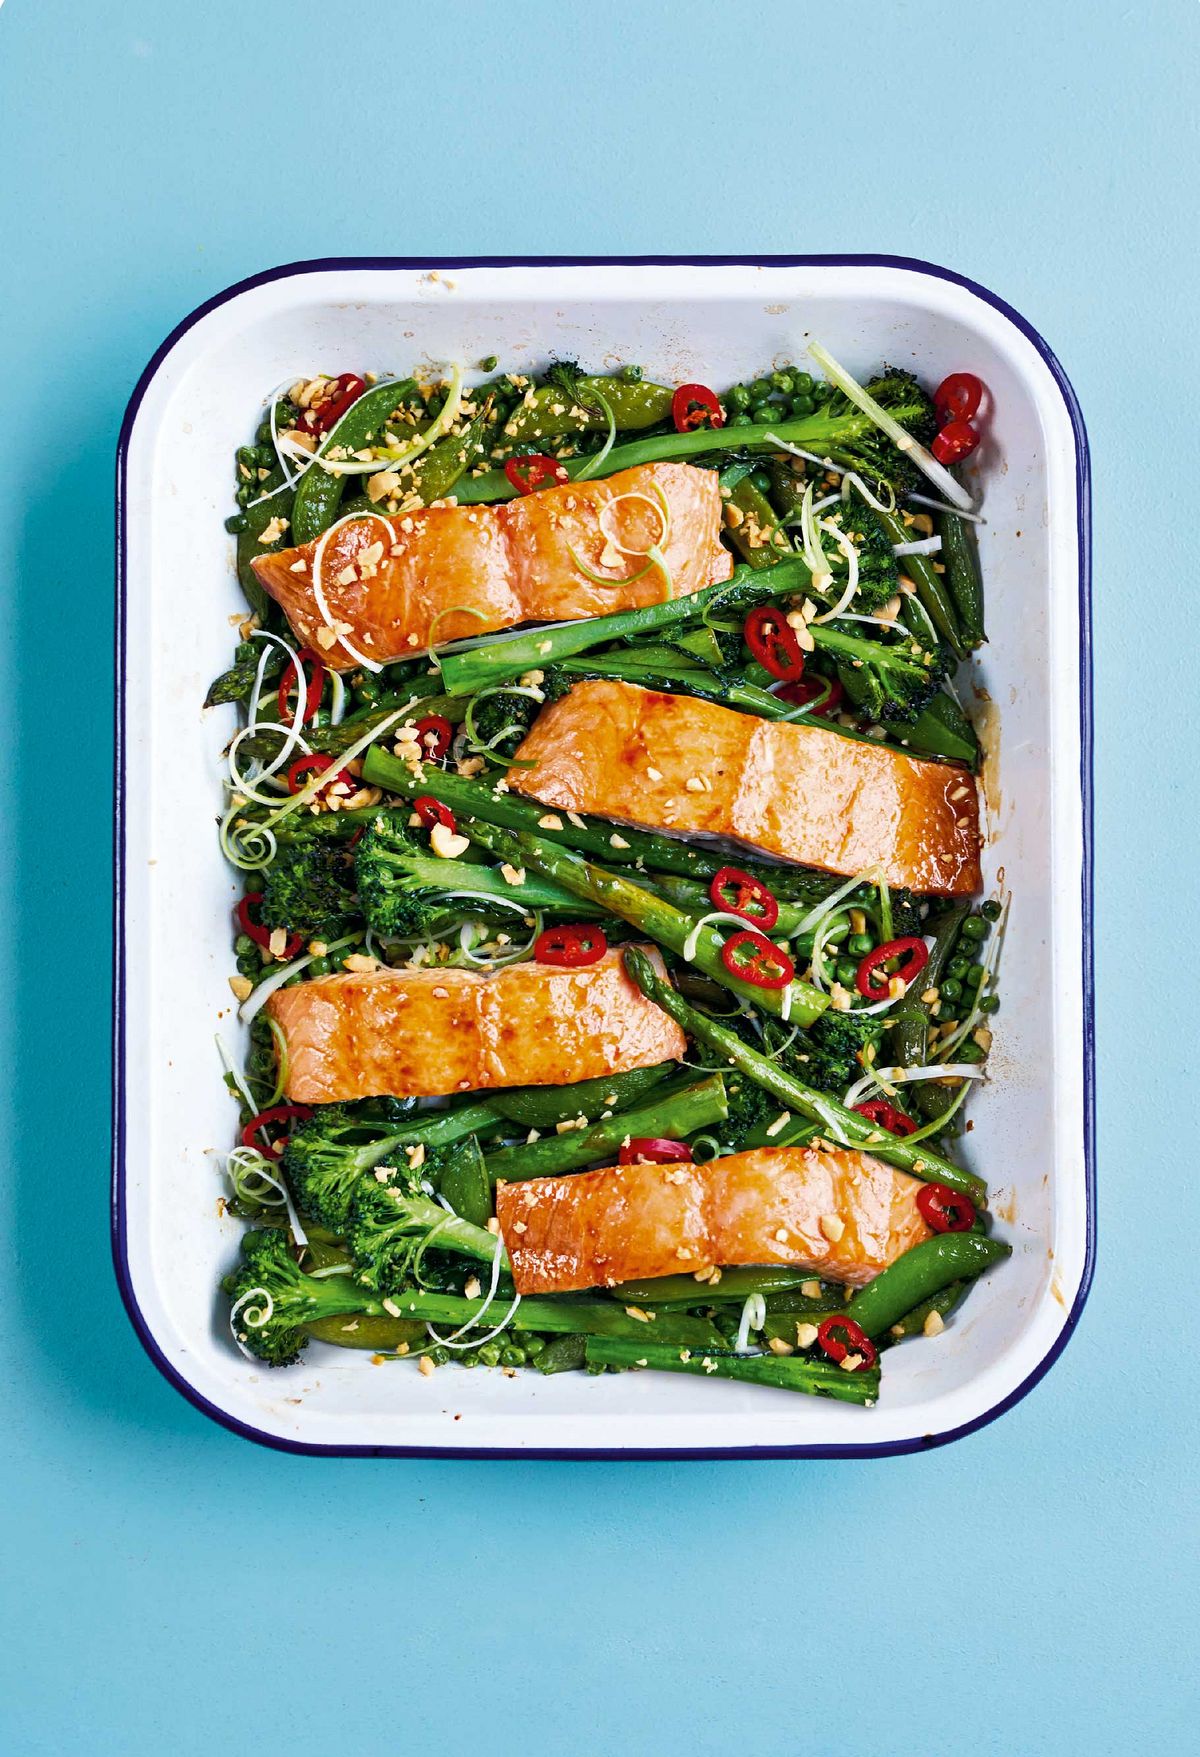 Sticky Soy and Honey Roasted Salmon with Asparagus and Sugar Snap Peas